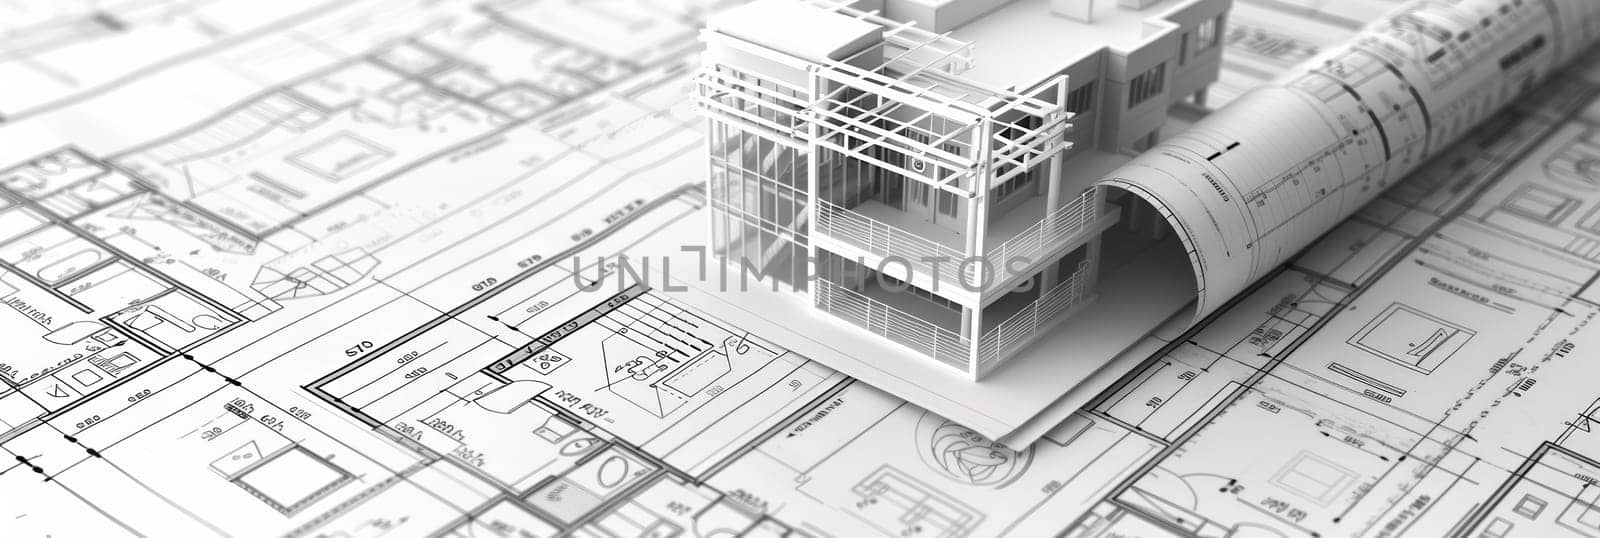 A miniature model of a building sits majestically on top of a detailed blueprint, illustrating the precise planning and design process of an architectural project.